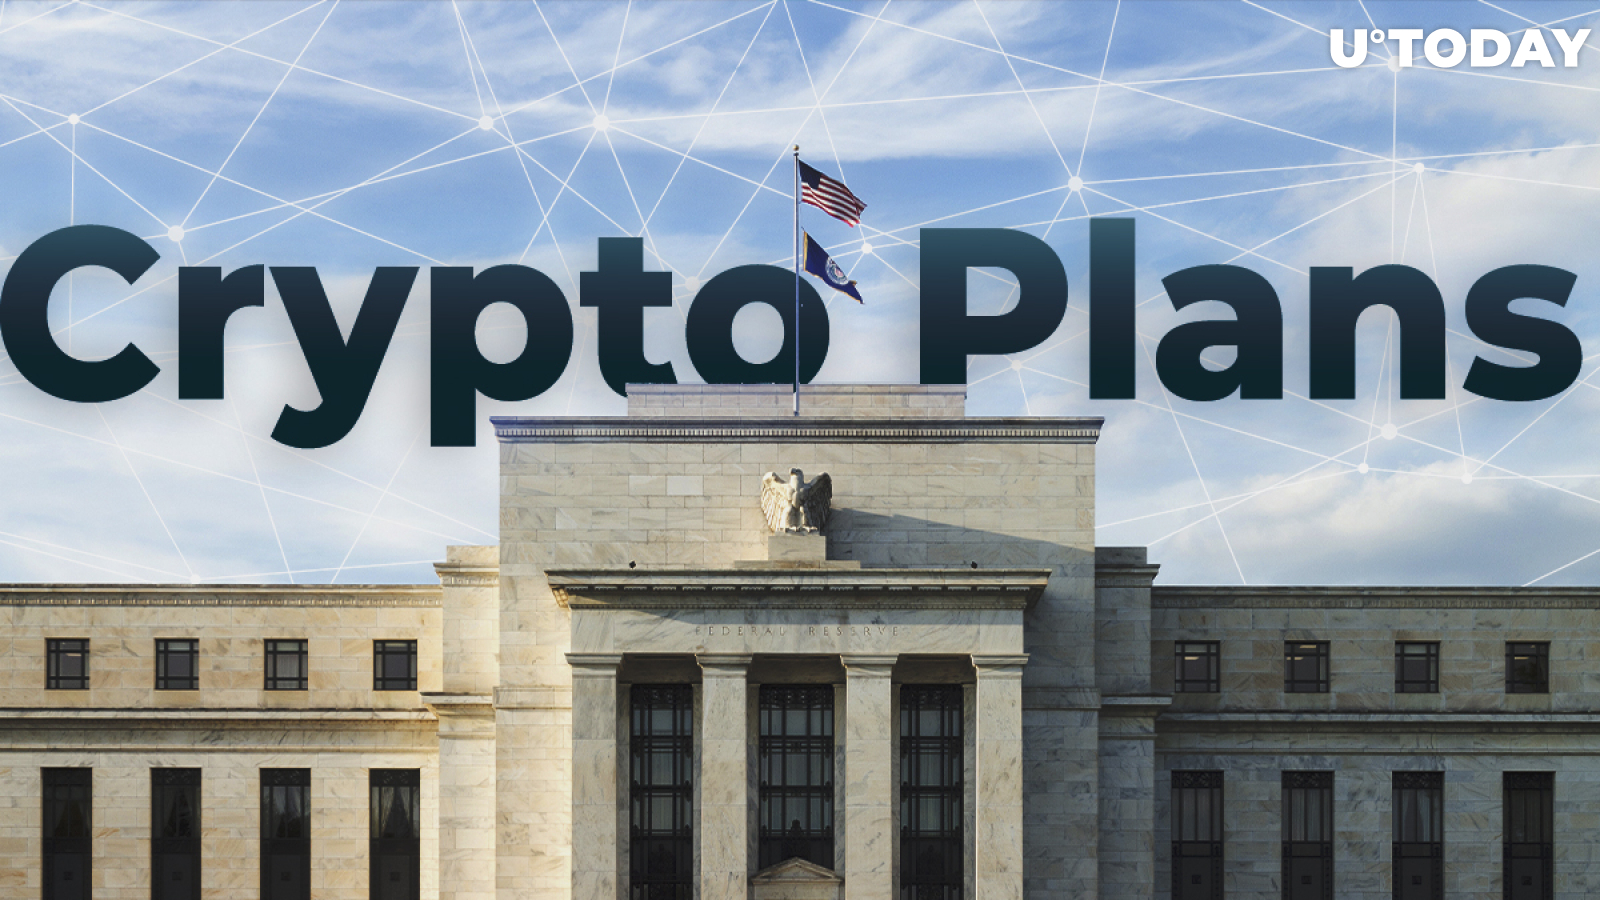 Crypto Is Here: US Federal Reserve Mulls Over Launching Digital Dollar